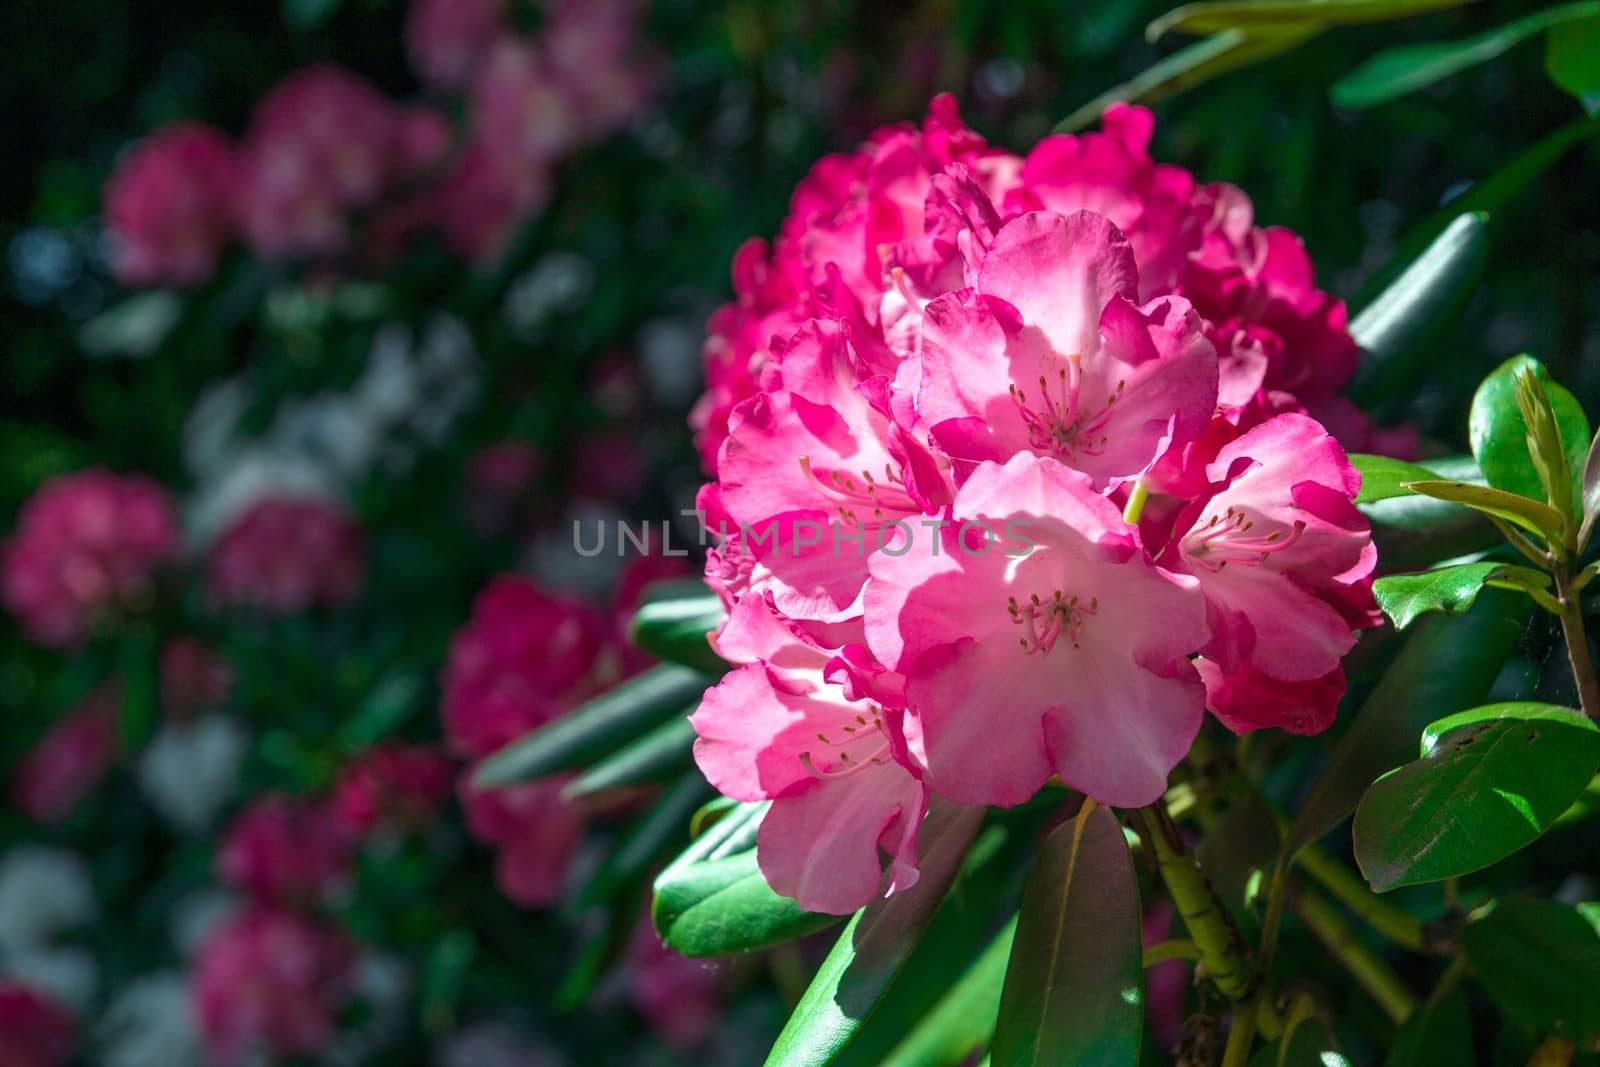 Rhododendron close-up, selective focus